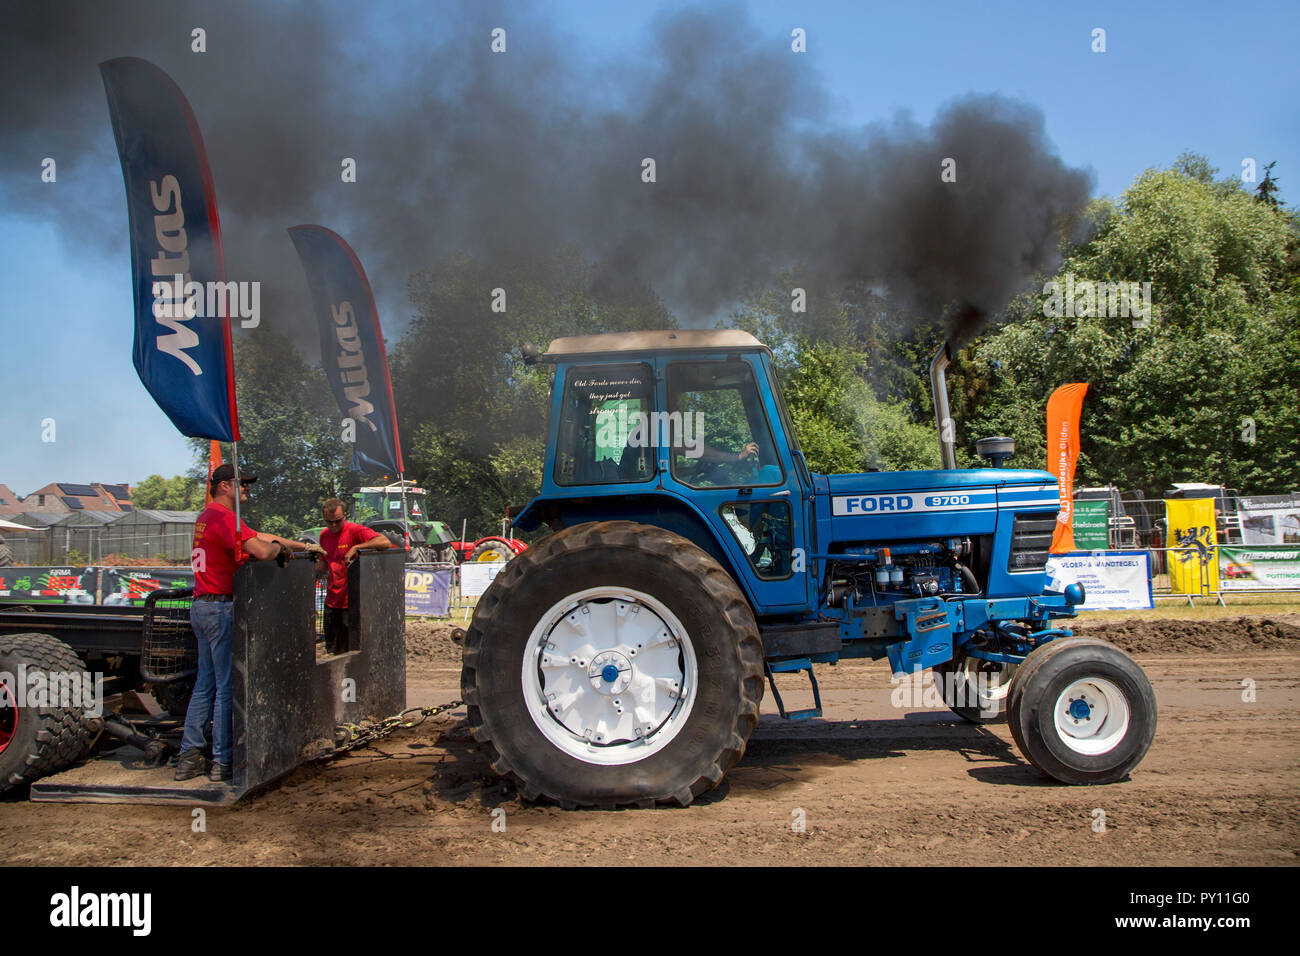 Non-modified diesel tractor Ford 9700 pulling heavy sled at Trekkertrek, tractor pulling competition in Zevergem, Flanders, Belgium Stock Photo